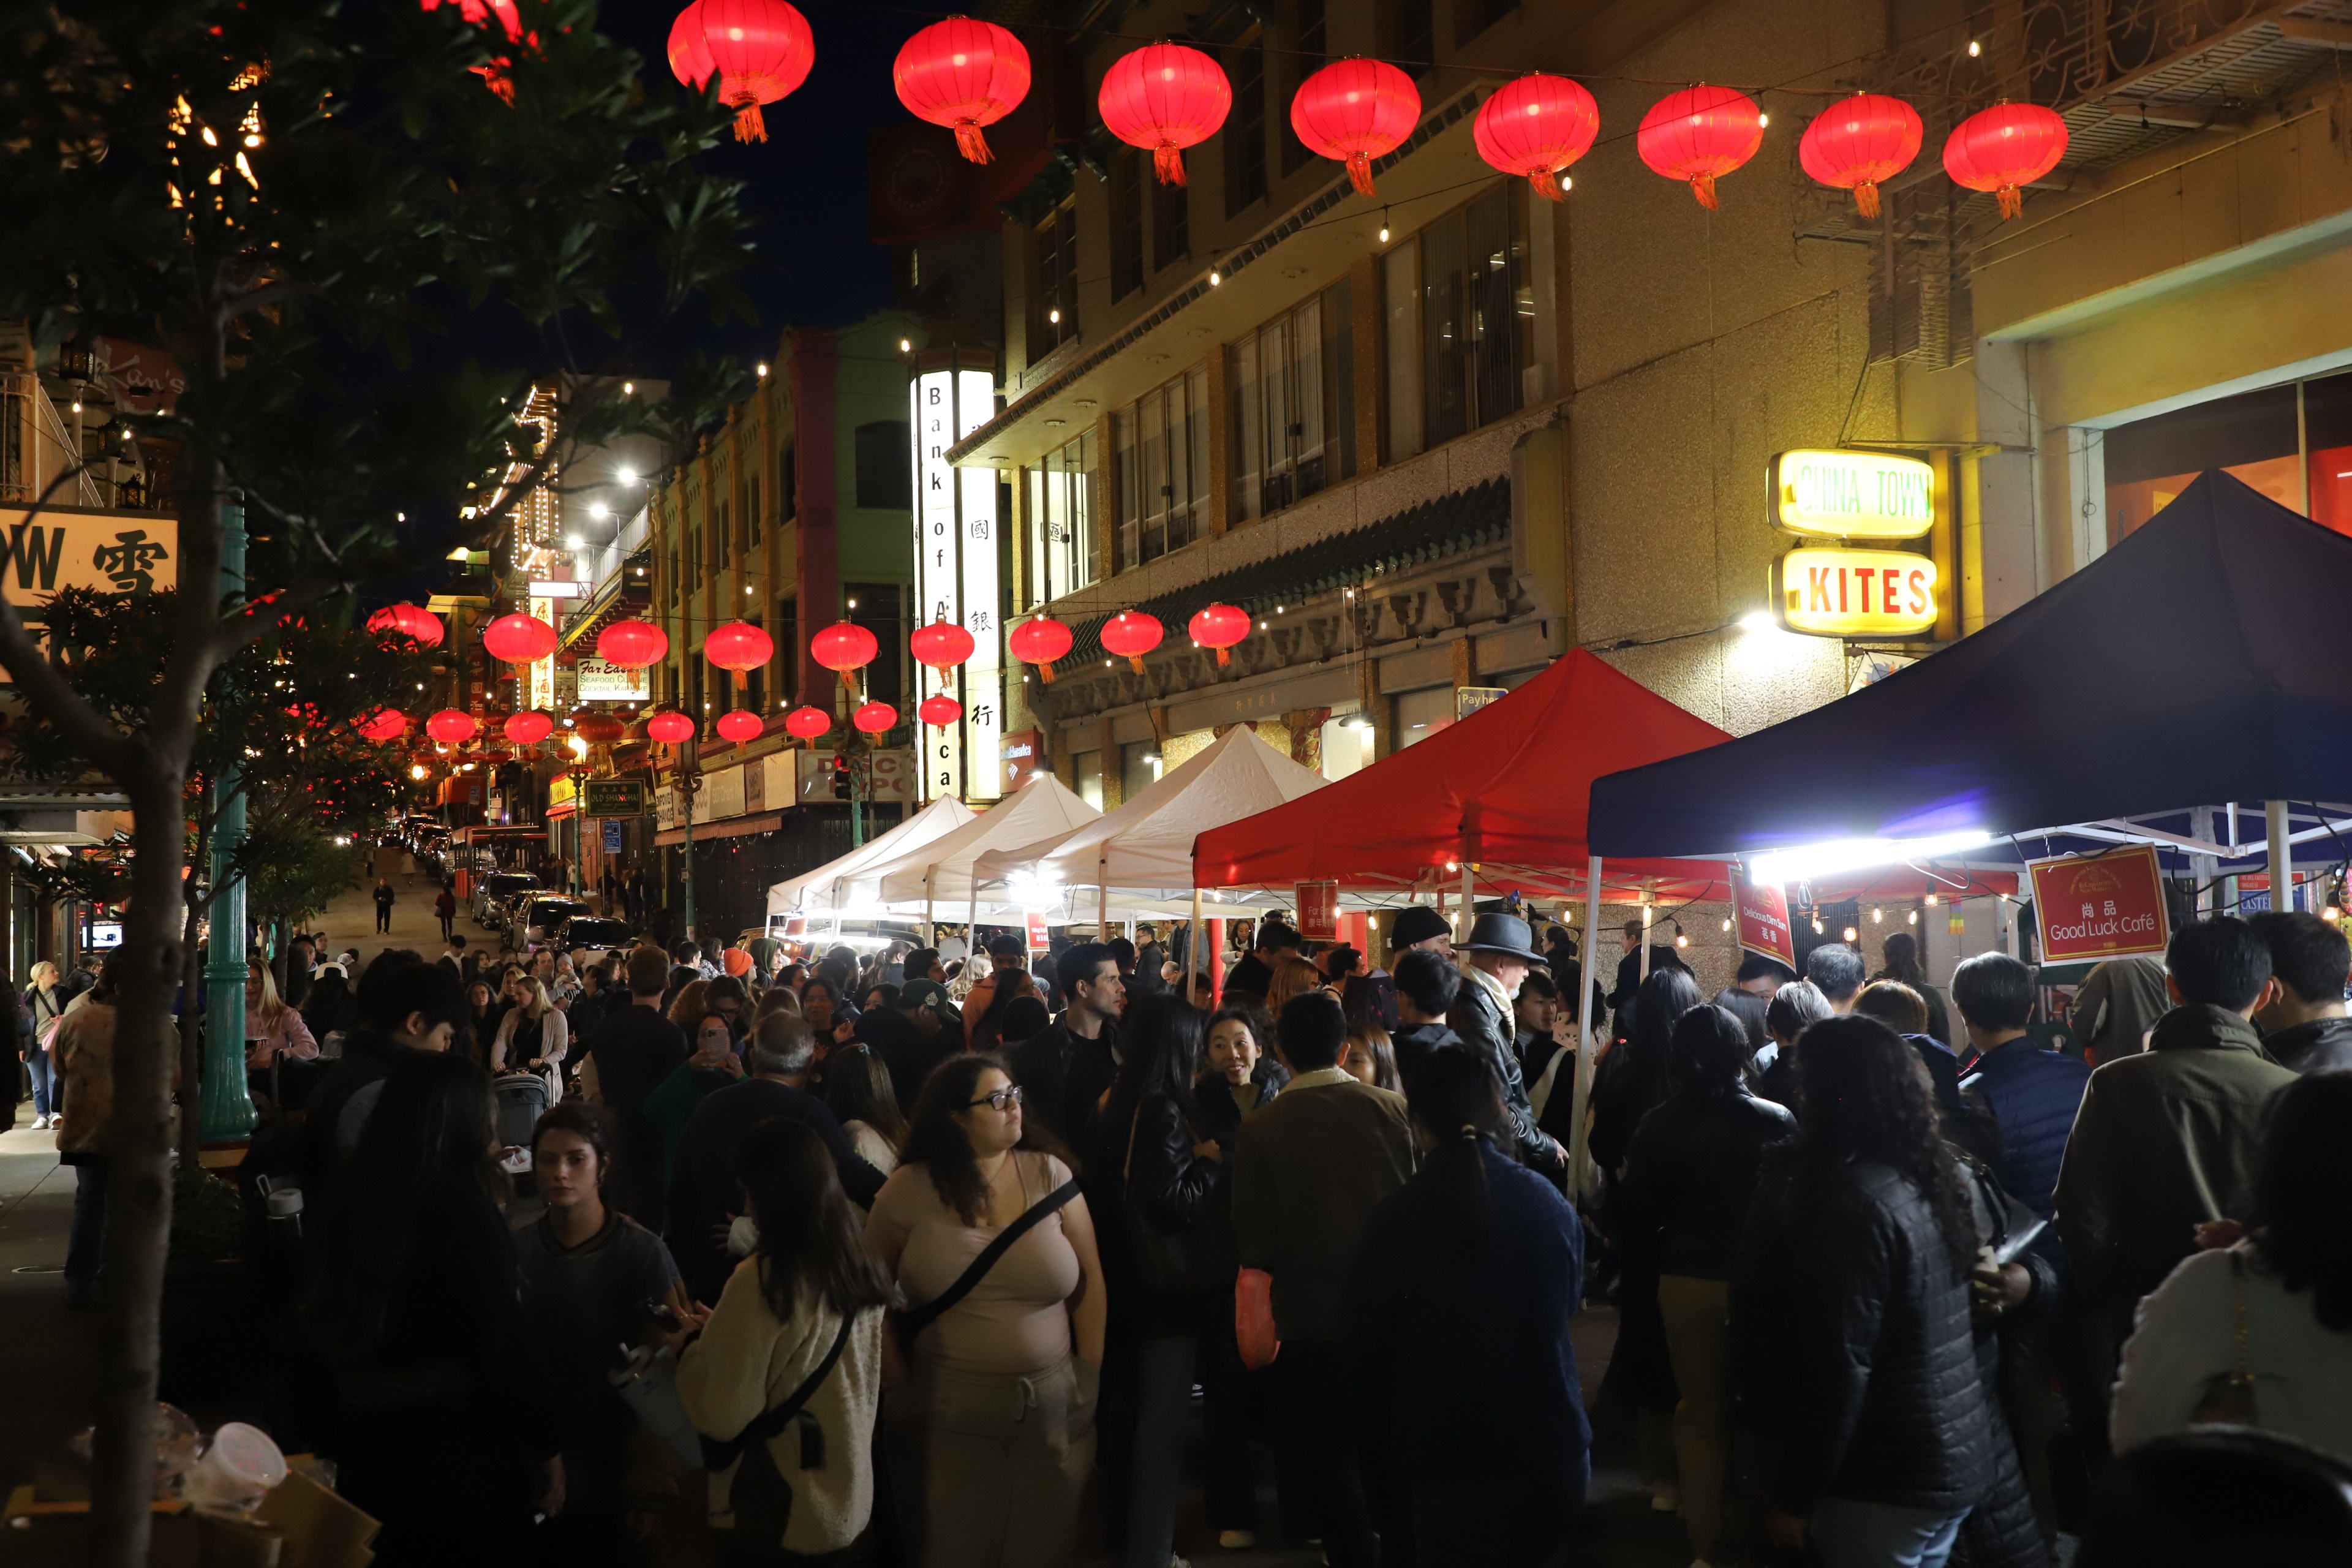 A bustling night market with red lanterns, crowds, and street vendor tents.